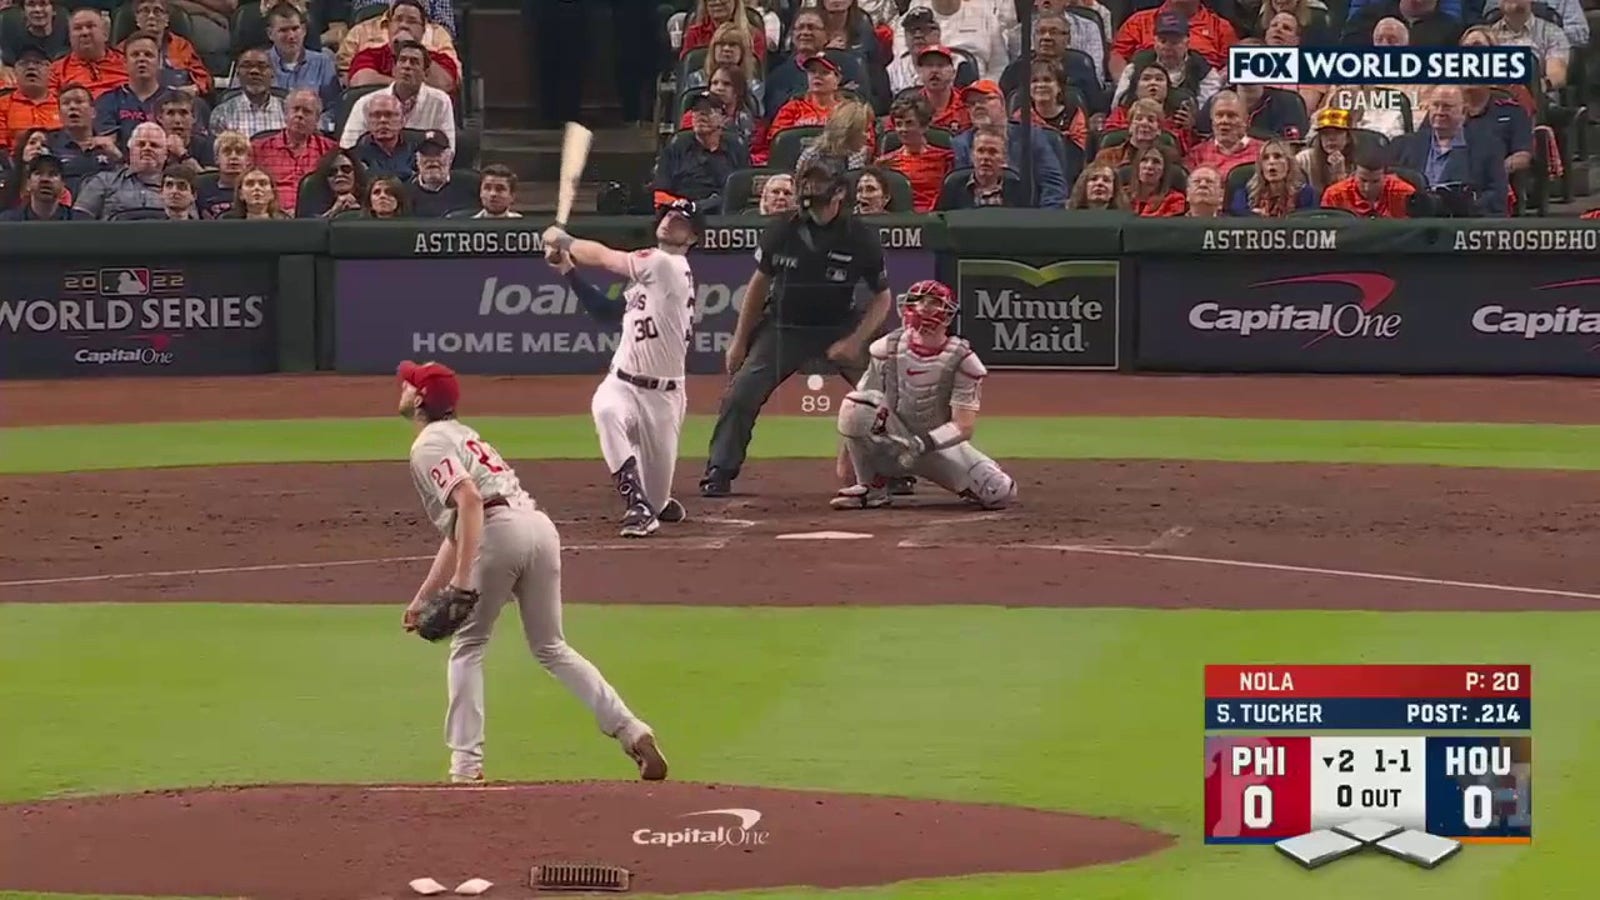 Kyle Tucker puts the Astros on the board with his first homer of the World Series